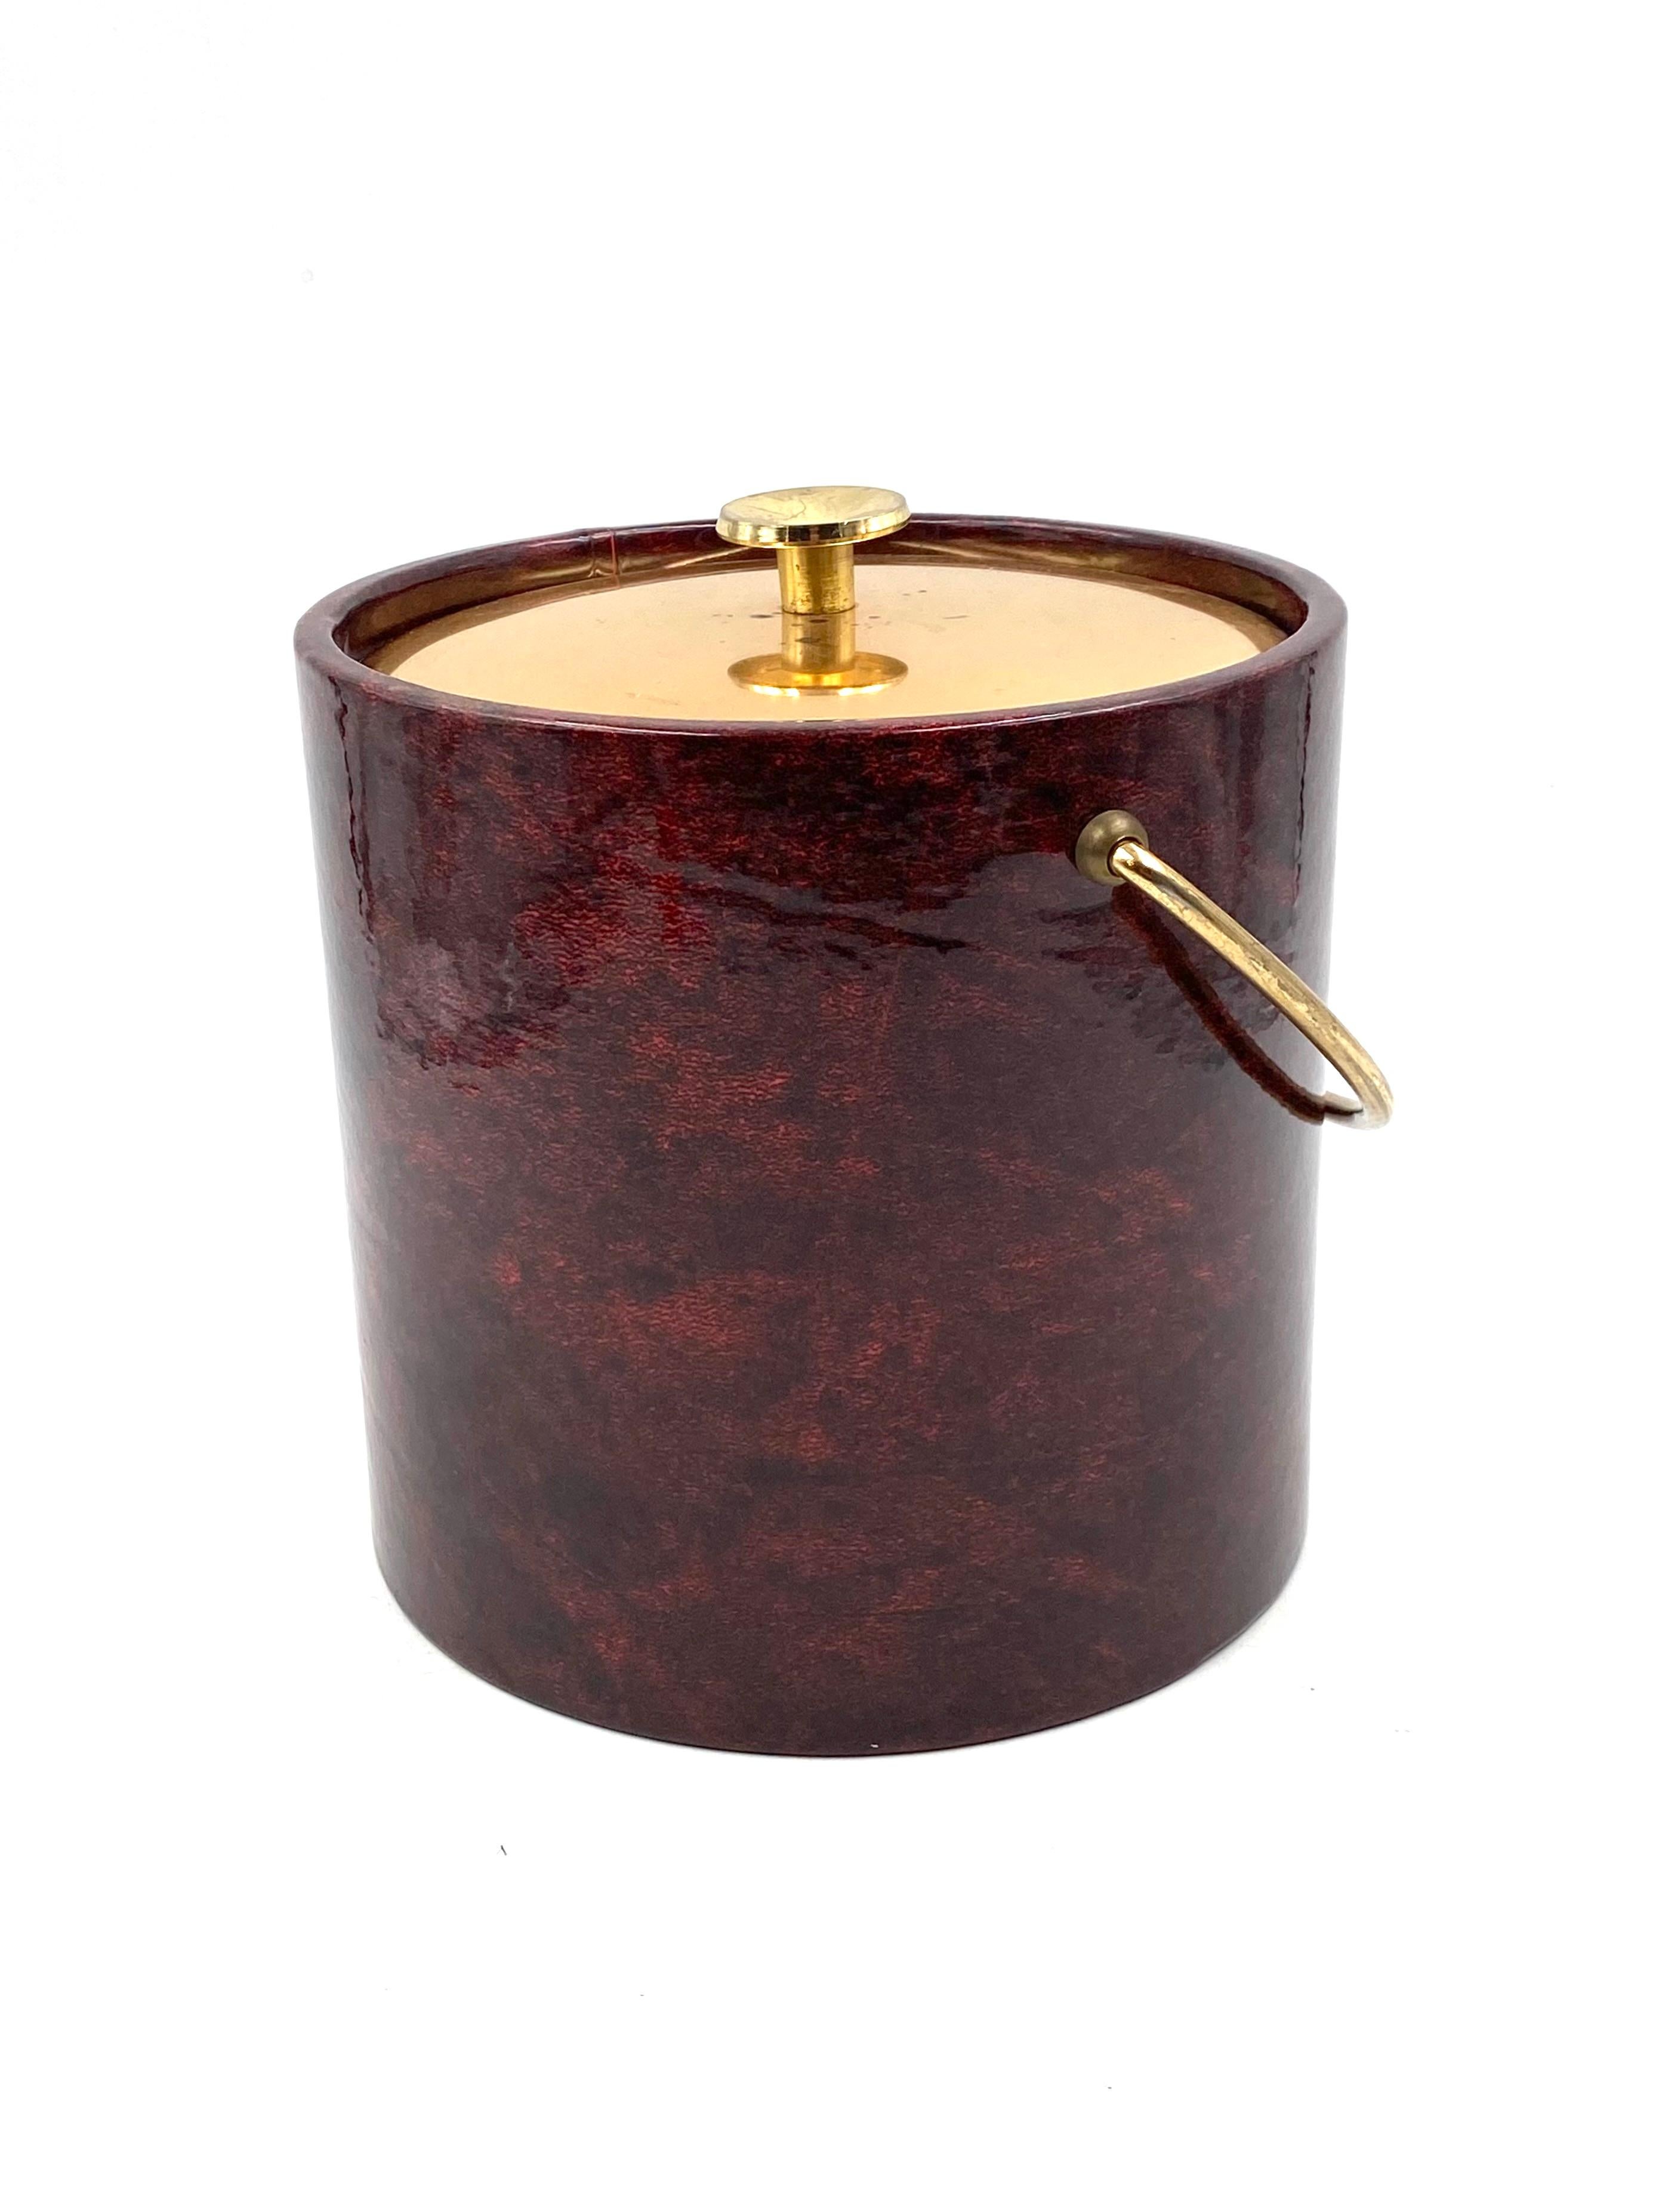 Aldo Tura, Brass and red Parchment cooler / Ice bucket, Italy 1960s For Sale 7